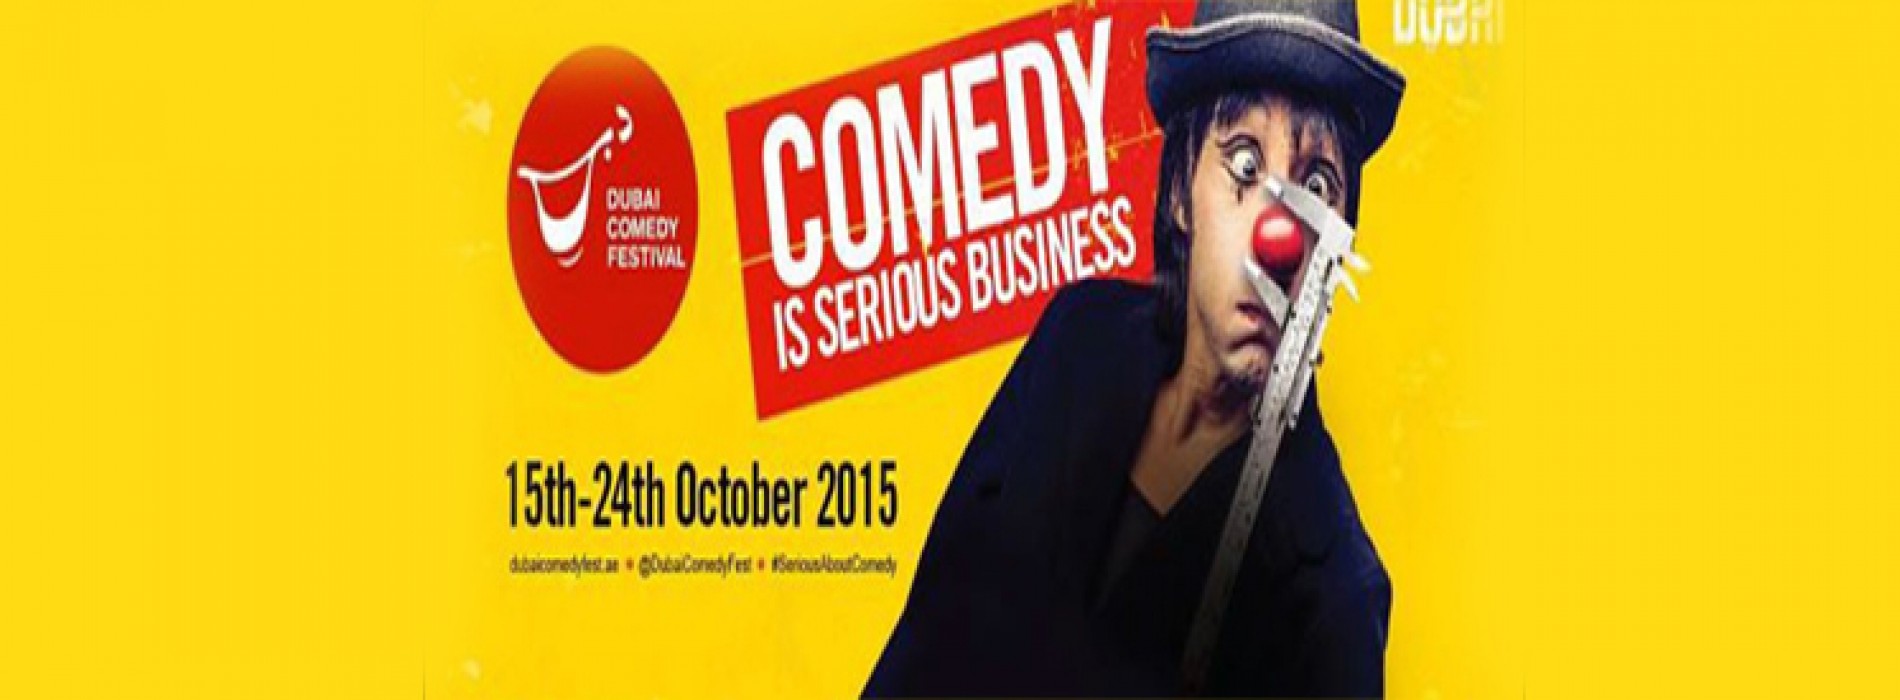 Dubai Comedy Festival a must visit for comedy lovers this October